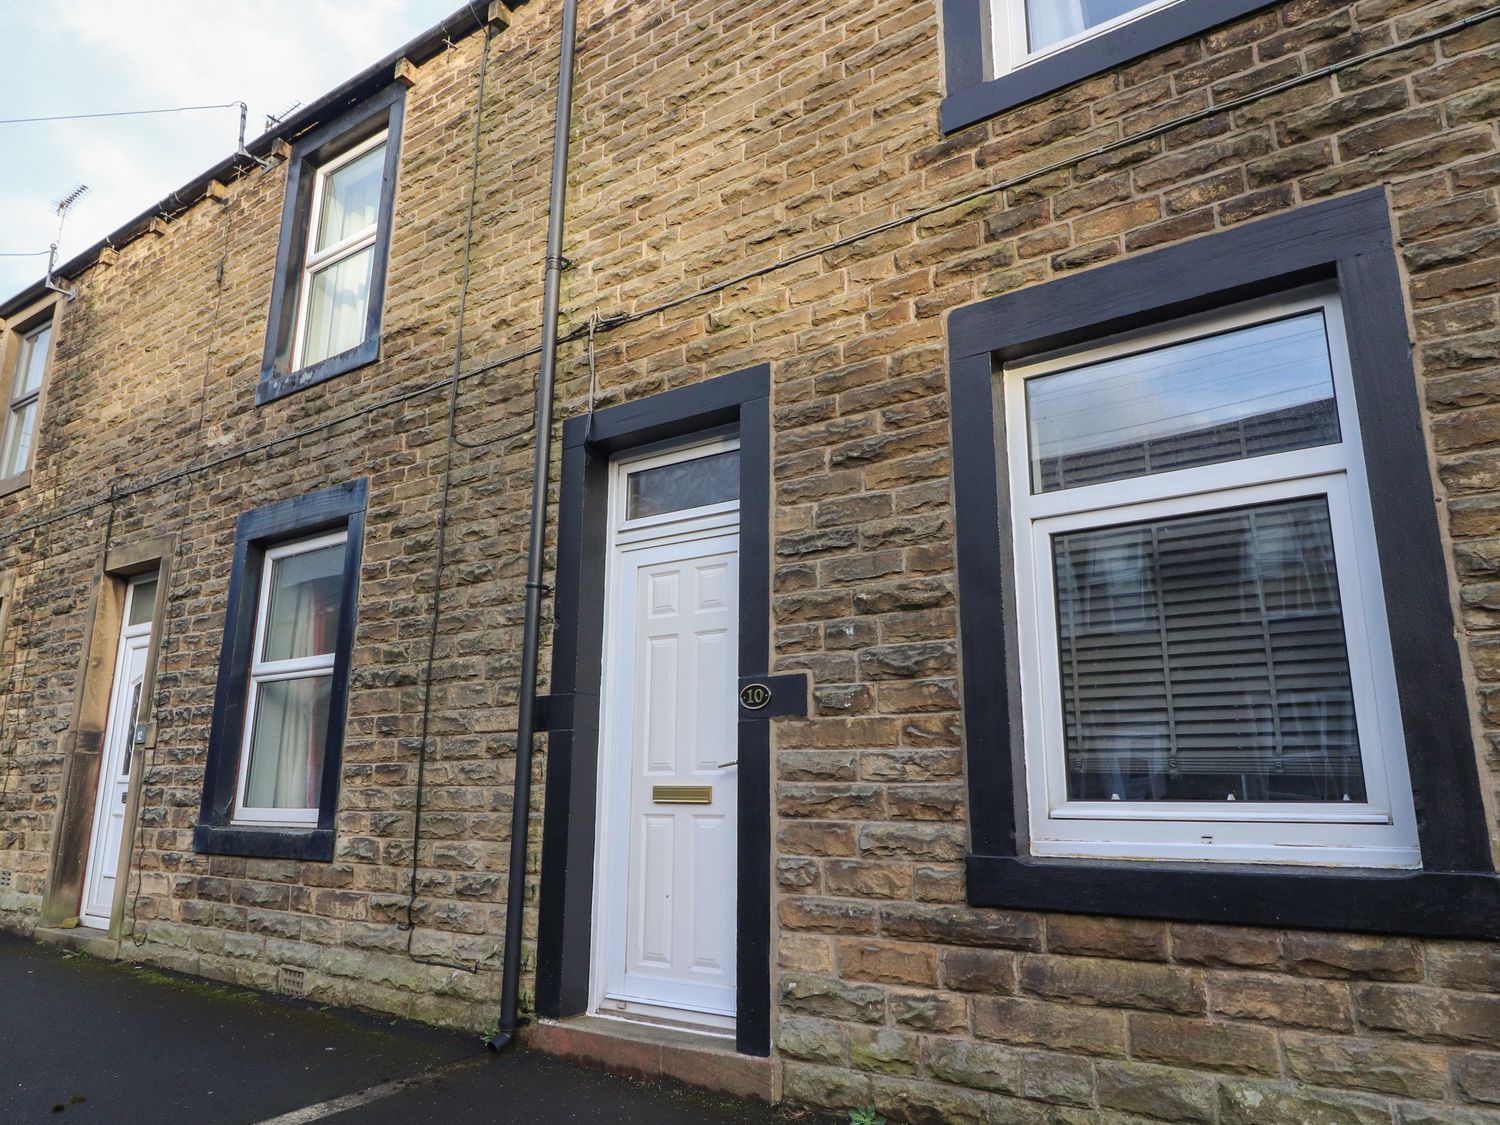 10 Haw Grove - North Yorkshire (incl. Whitby) - 1125028 - photo 1